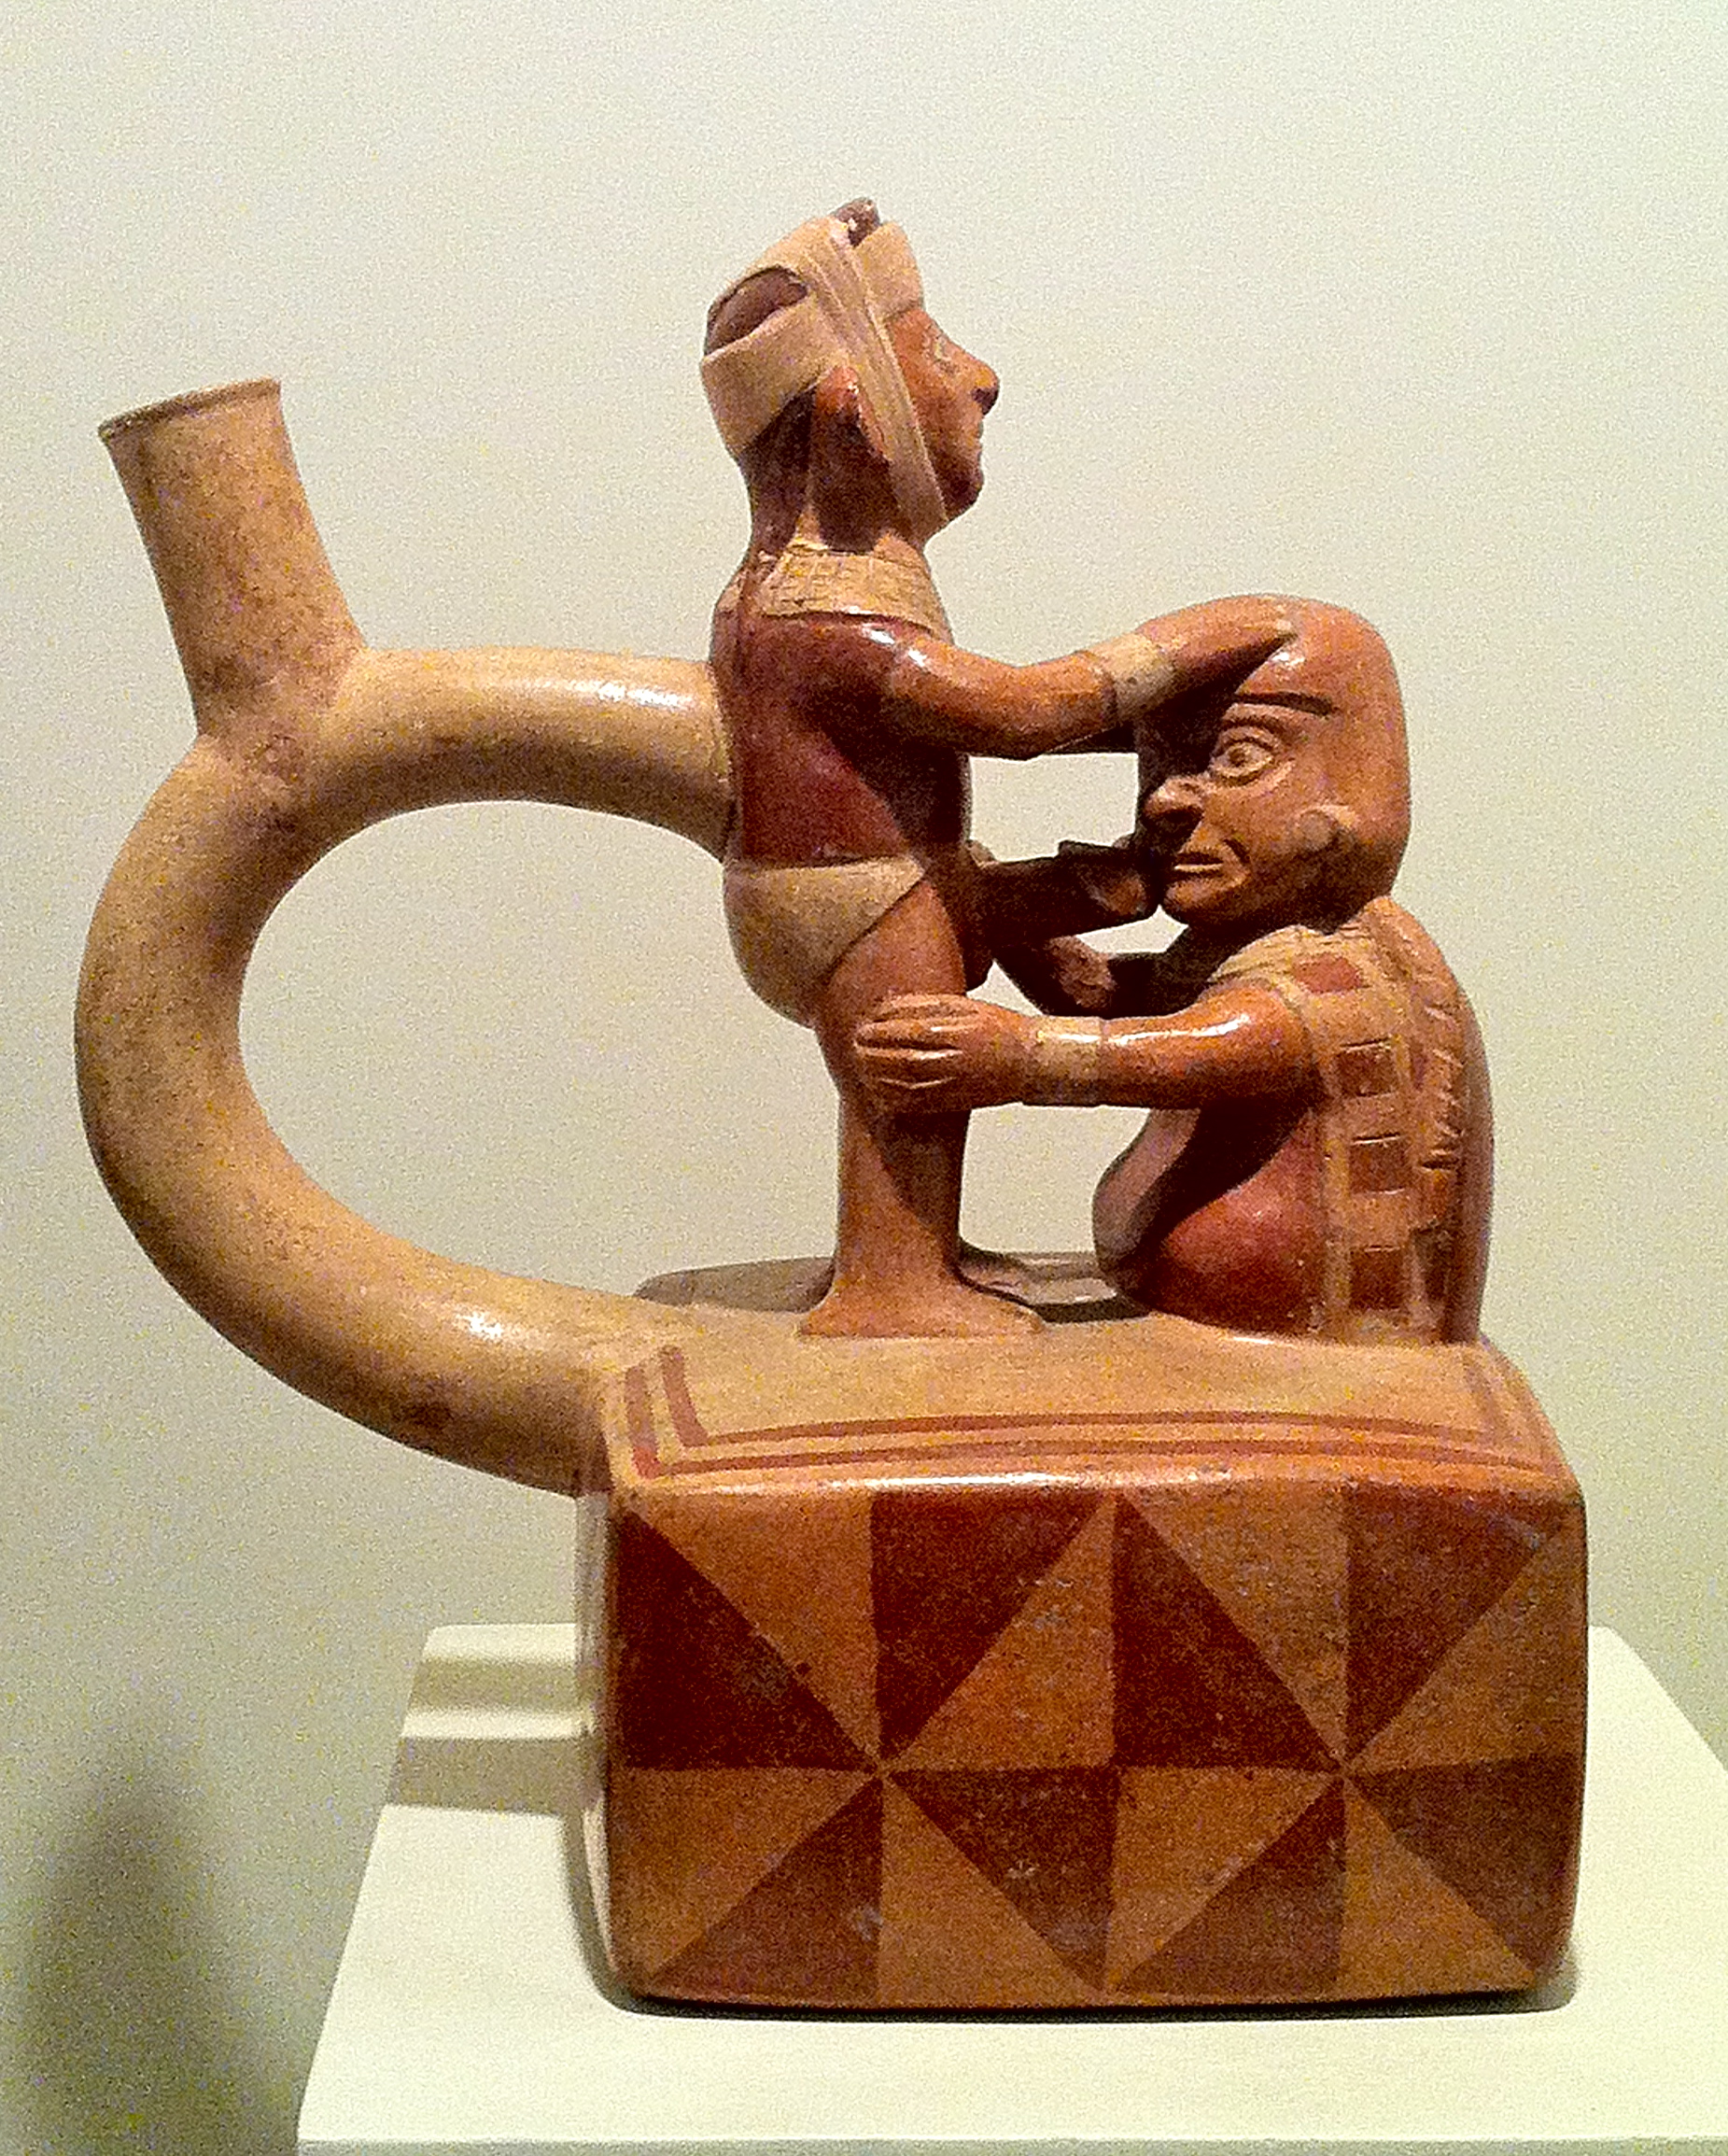 Pottery vessel that depicts two figures, one kneeling by a phallic image.